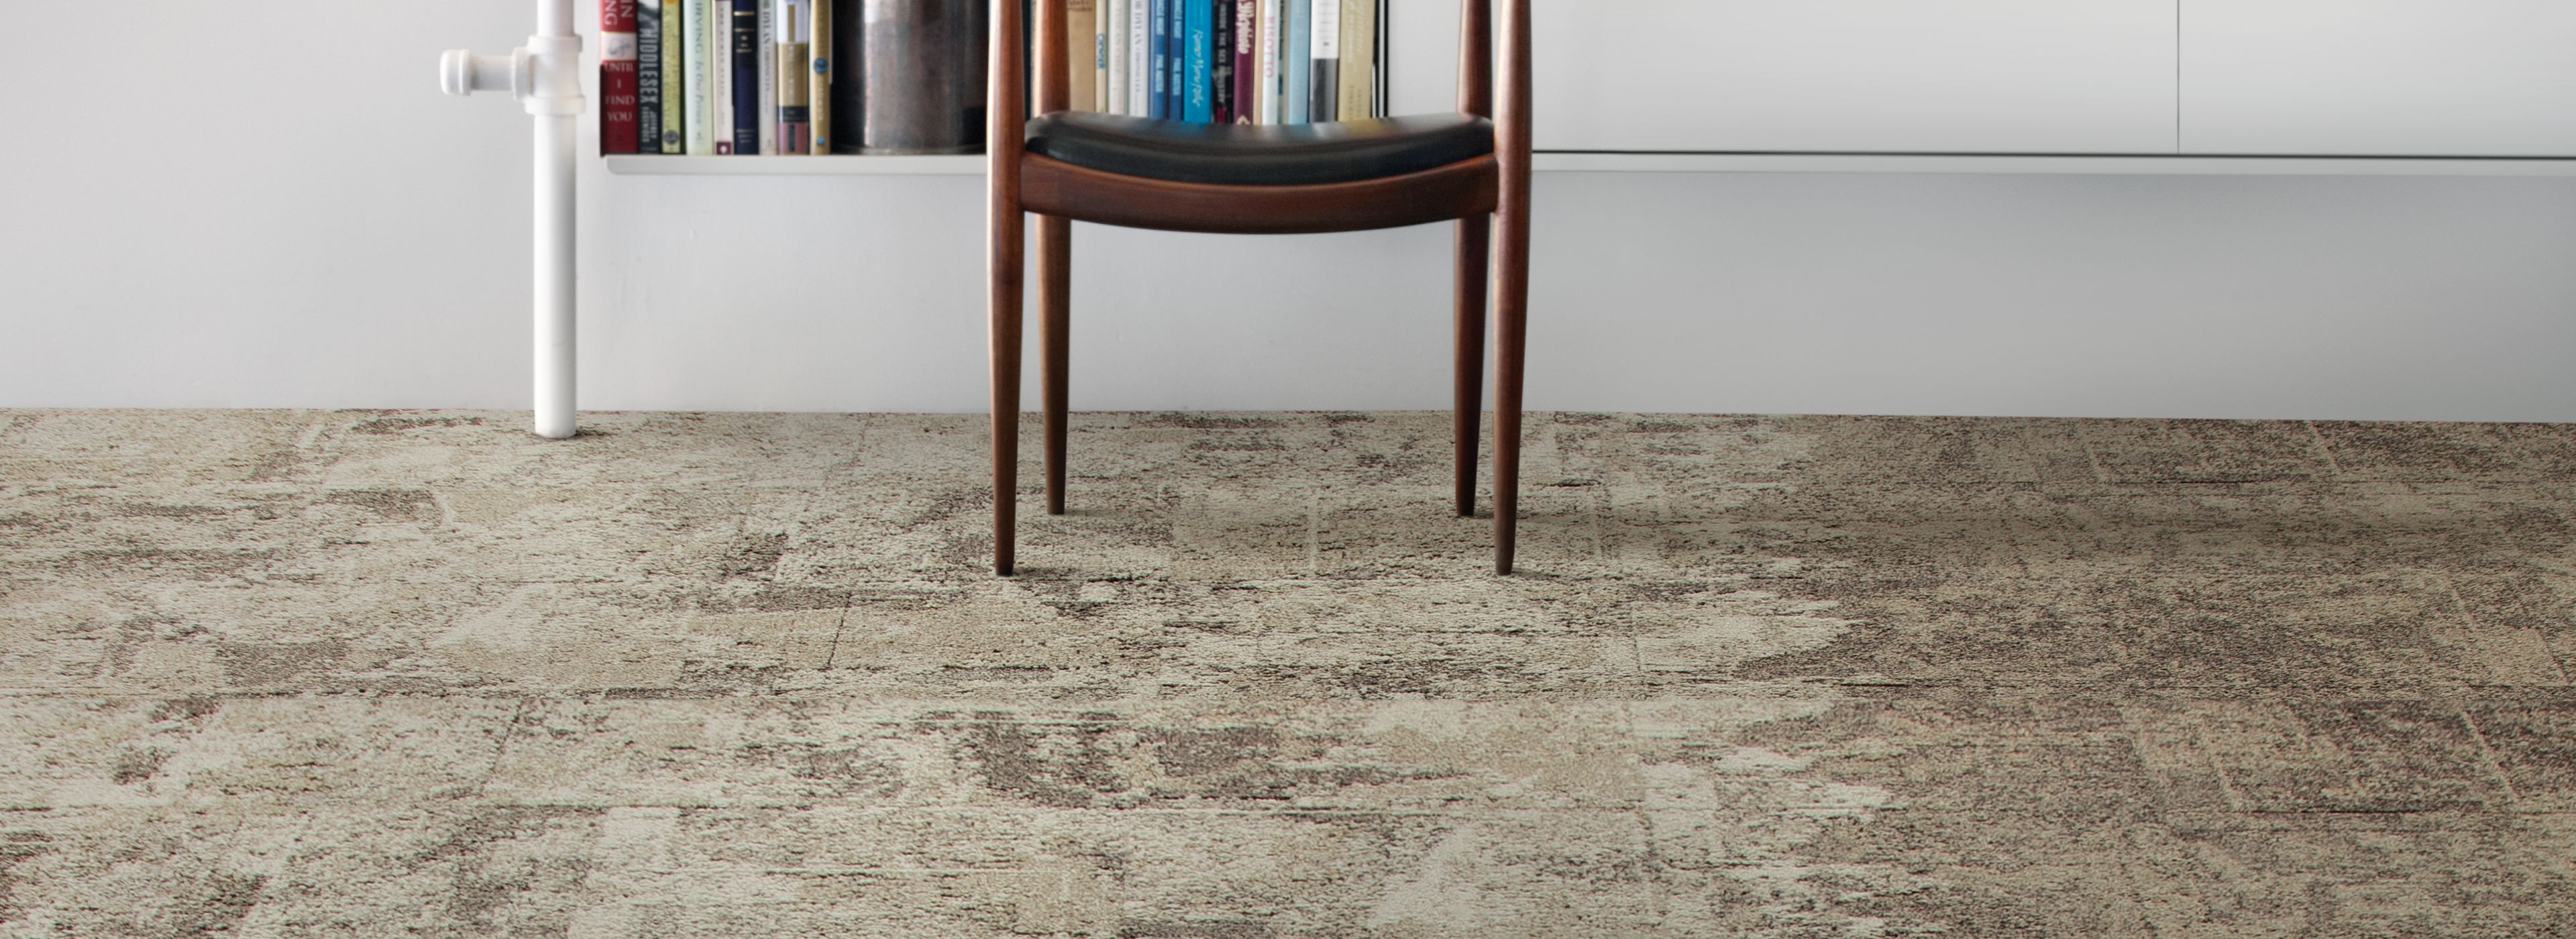 Interface B601, B602 and B603 carpet tile in library with wooden chair número de imagen 1